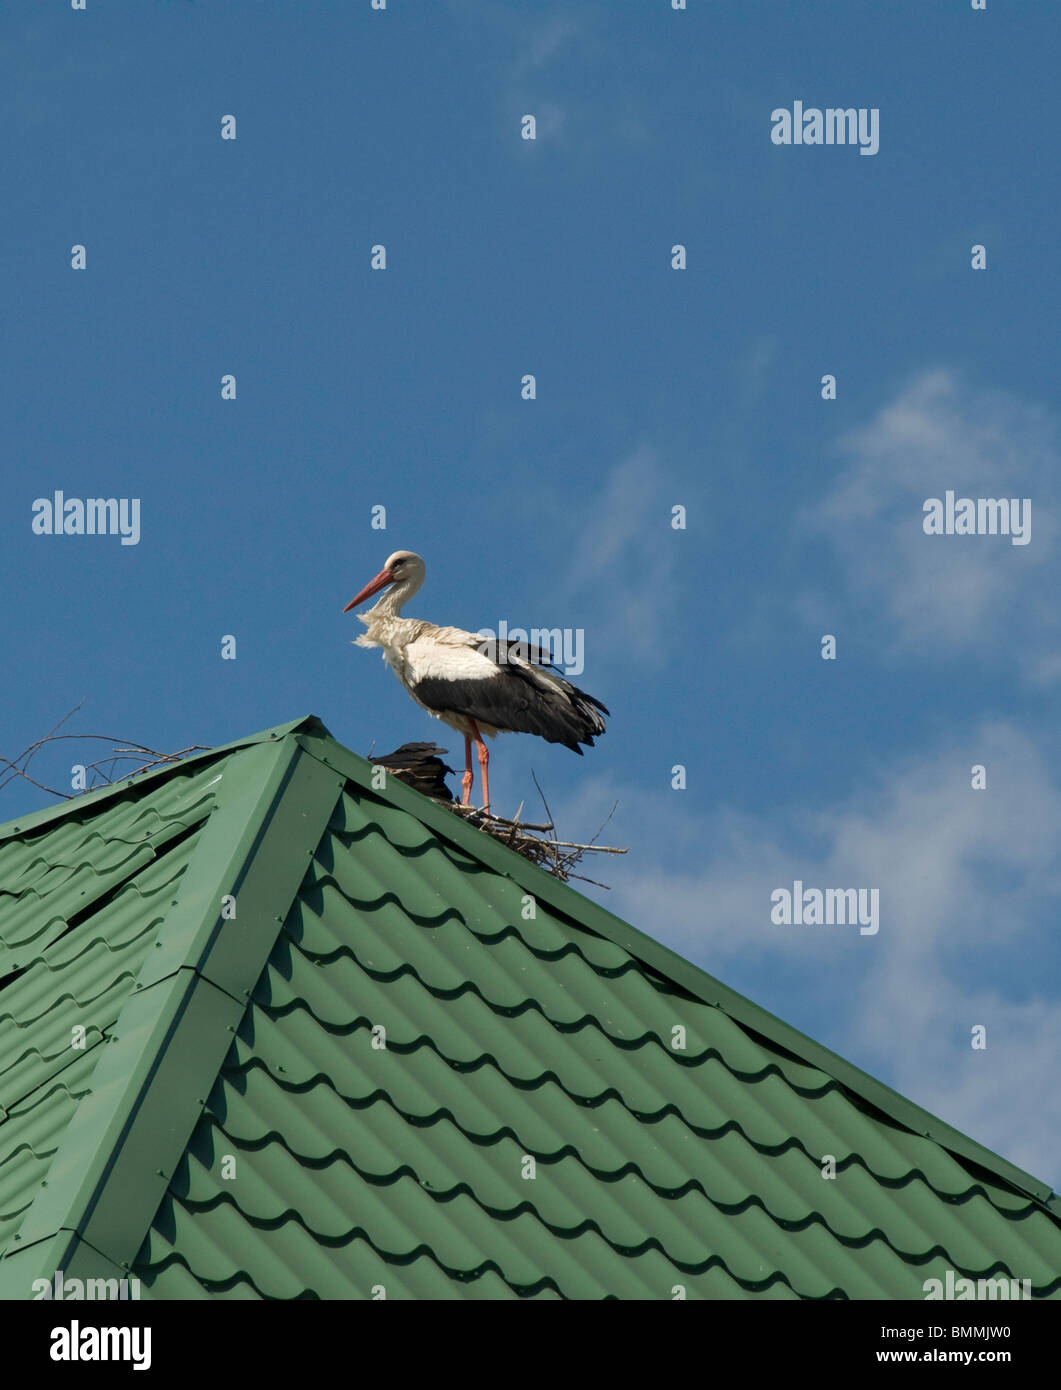 a stork on a roof Stock Photo